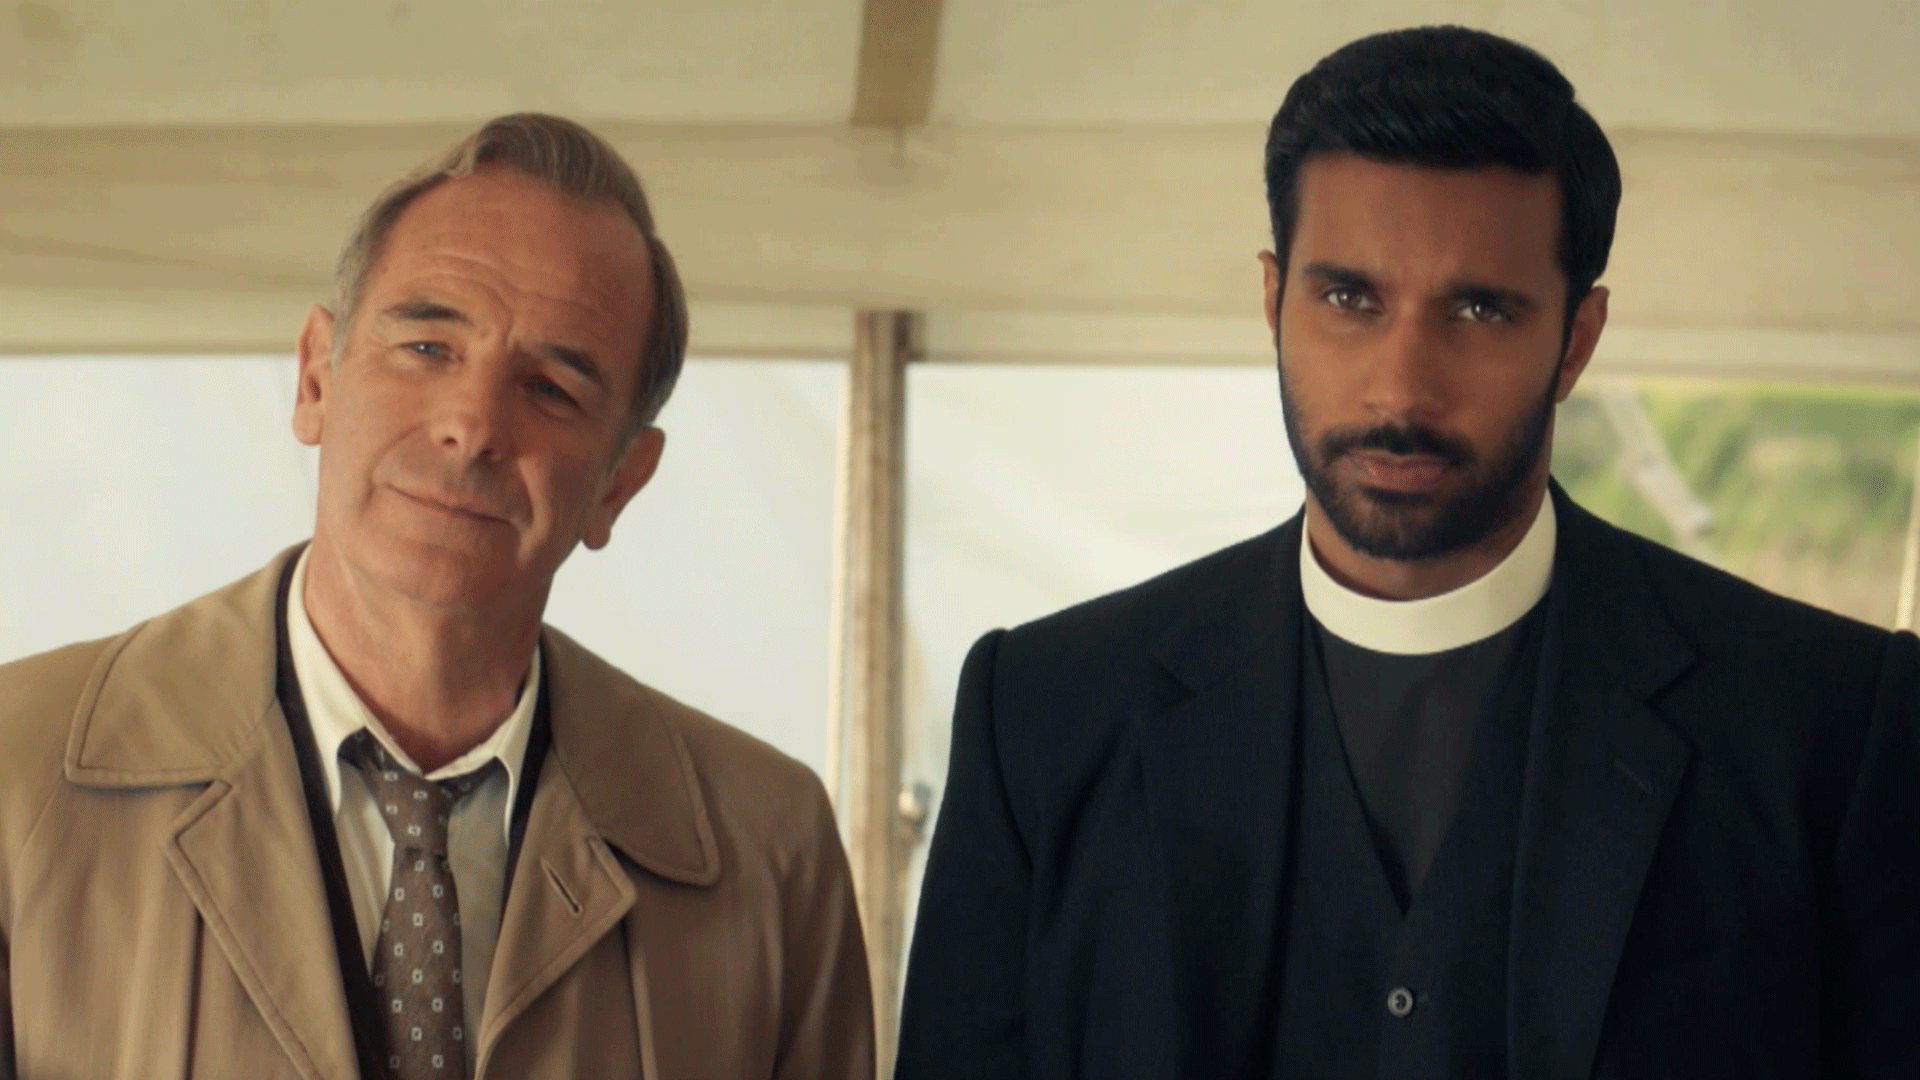 the main two characters of Grantchester looking serious at something just of frame behind the camera perspective